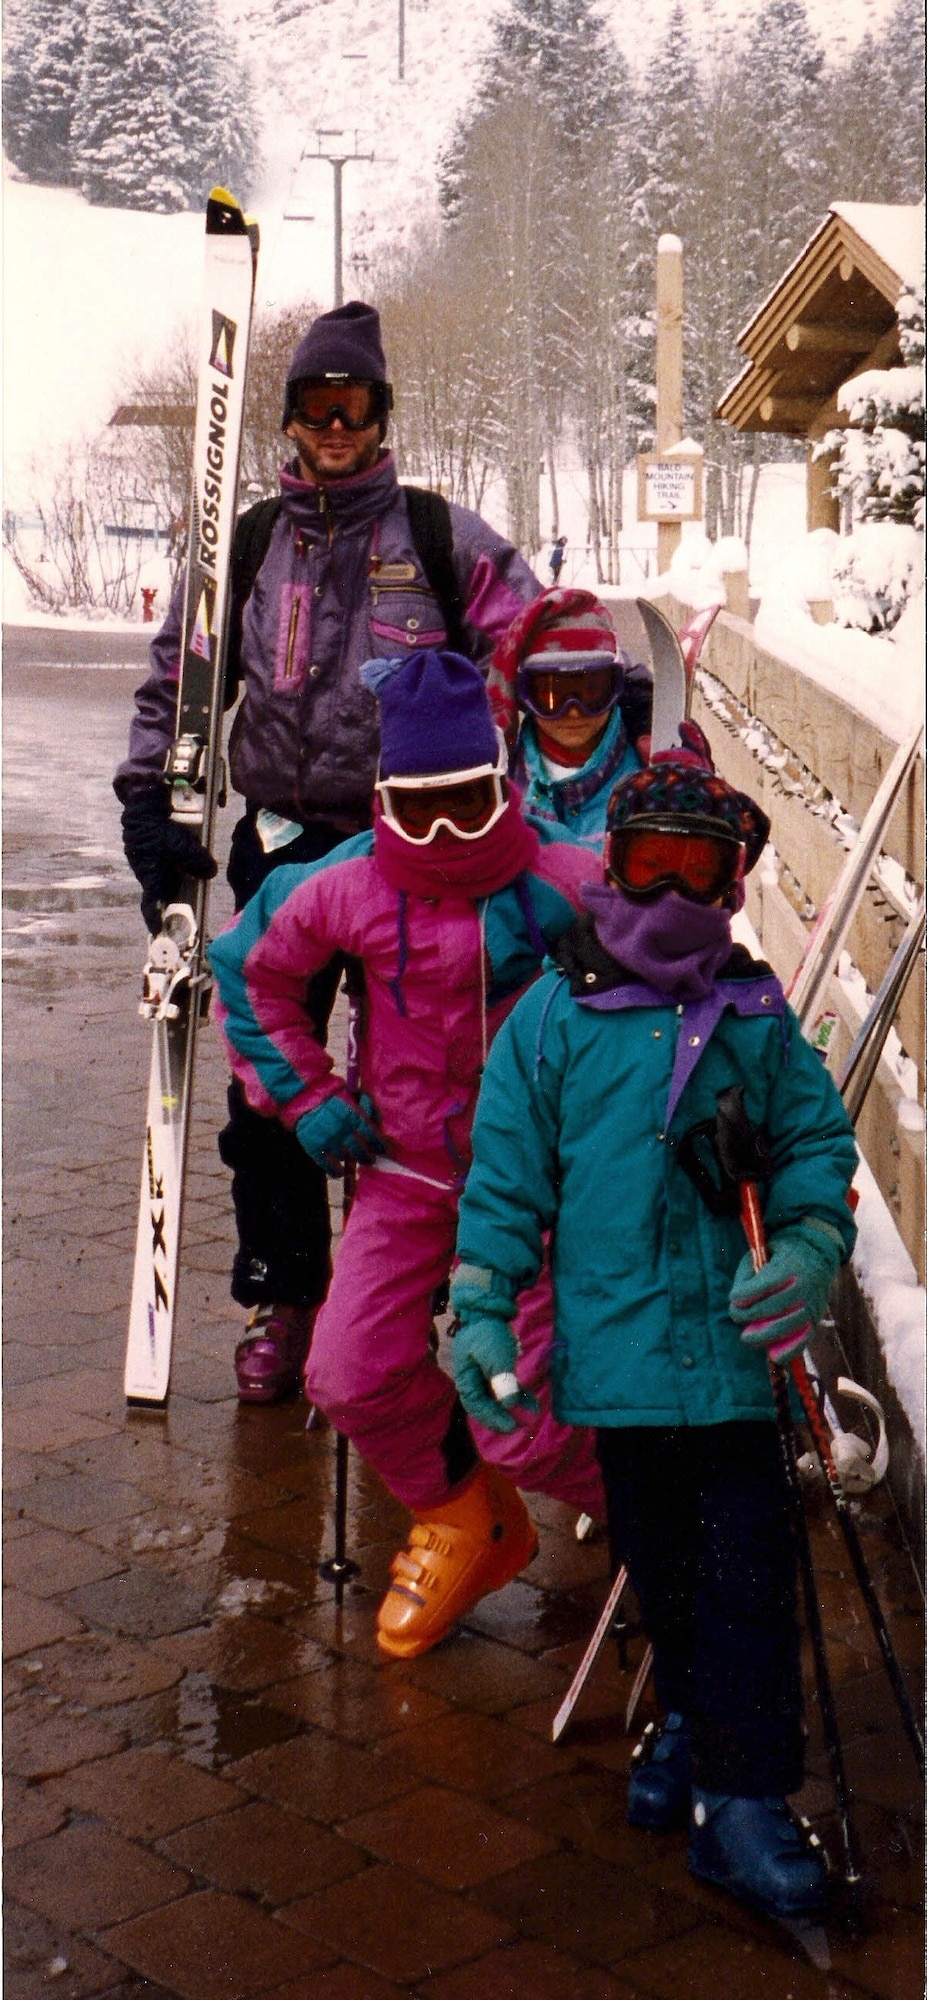 The Wise family poses for a photo during a day of skiing. David Wise, an Olympic gold medalist in halfpipe skiing, U.S. Air Force Capt. Christy Wise, an HC-130J Combat King II pilot, and Jessica Wise grew up in Reno, Nev., with parents who also enjoyed skiing and took the children on many ski trips. (Courtesy photo)
